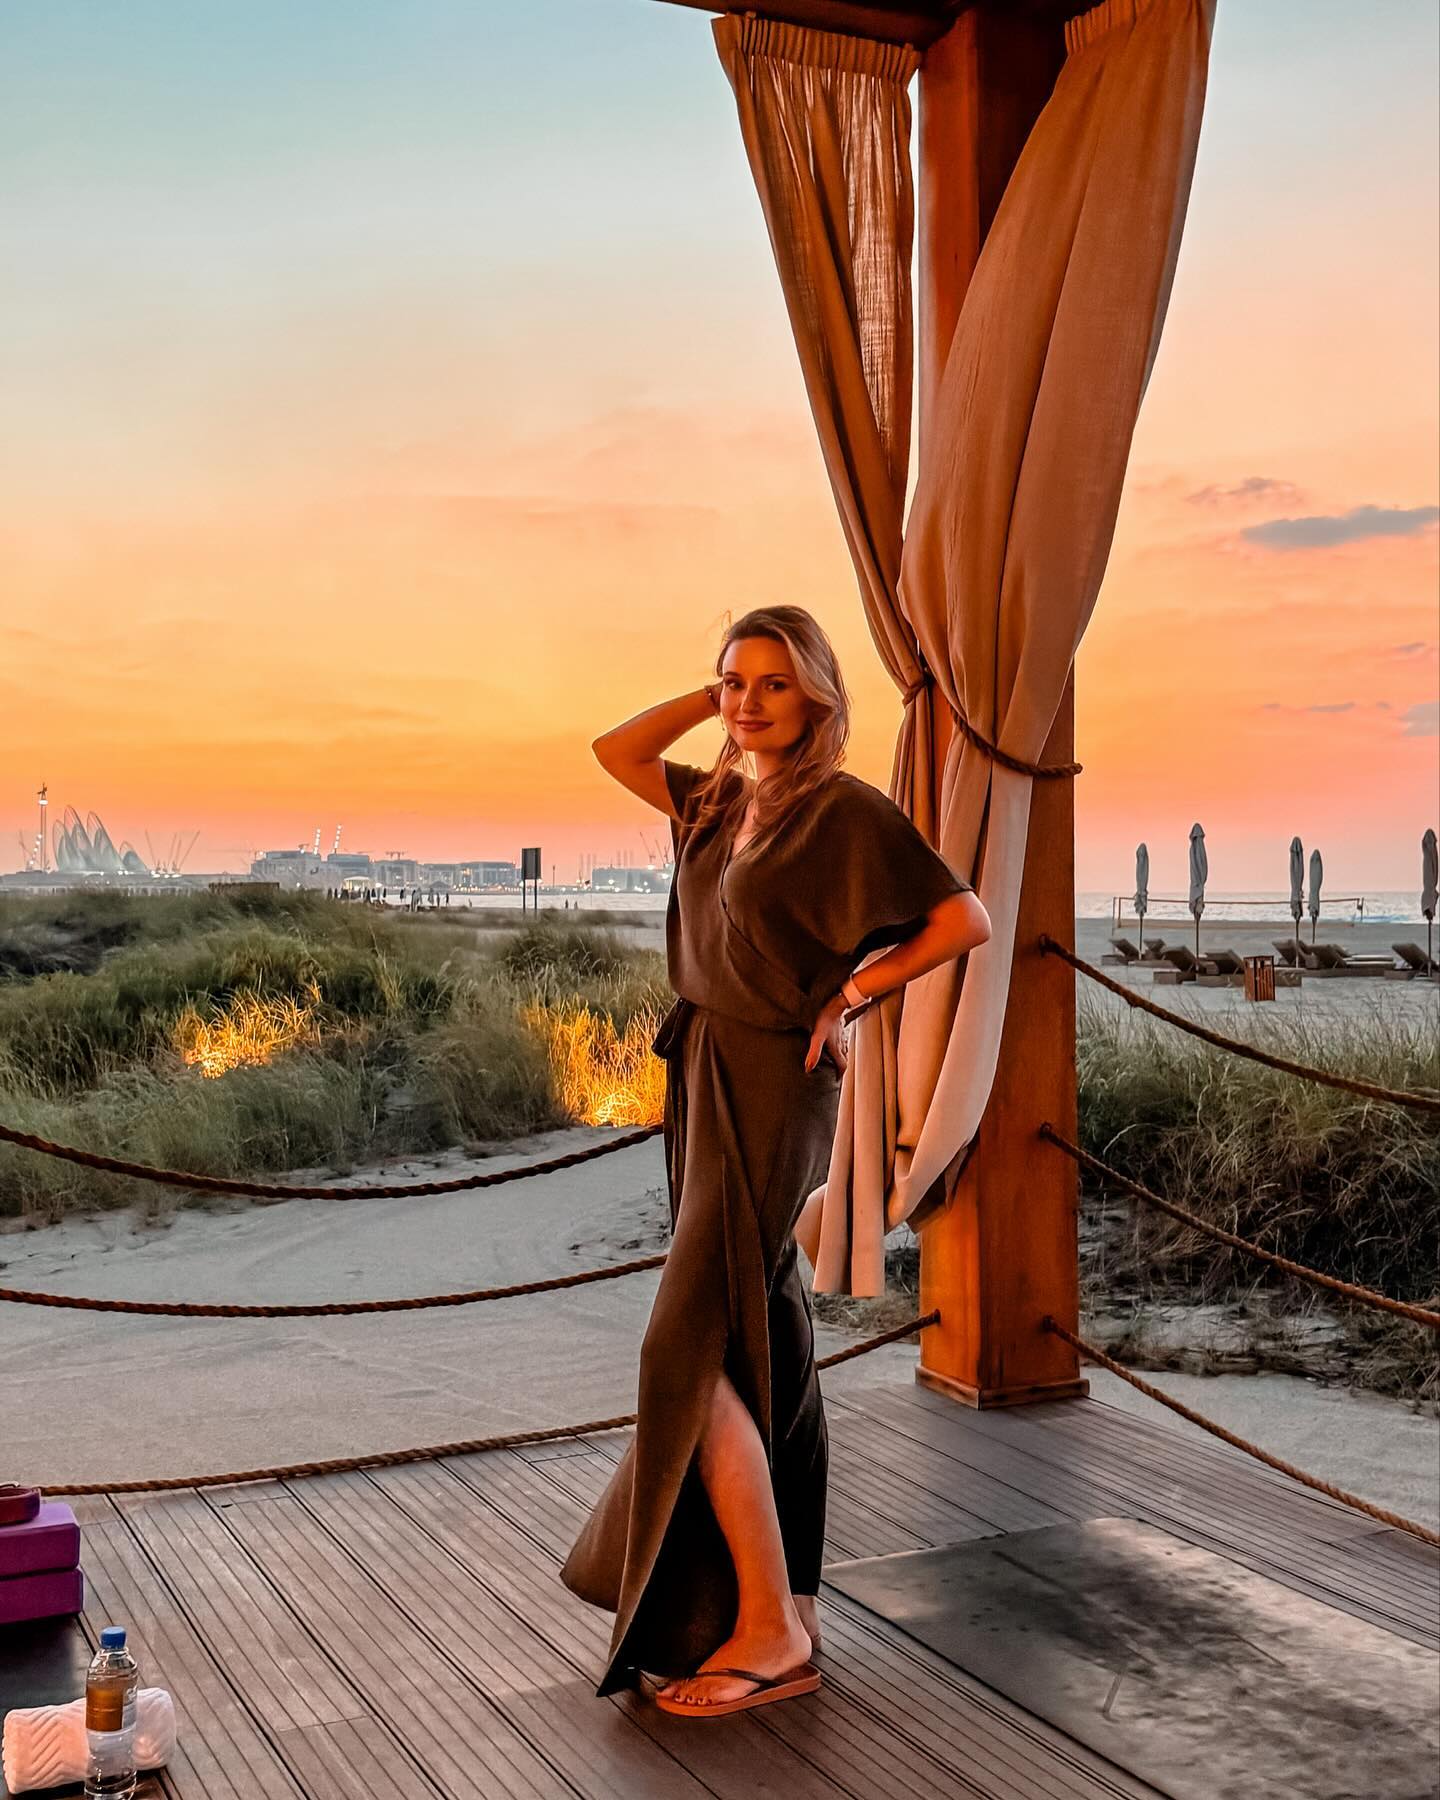 The magic of sunsets on Saadiyat Island in Abu Dhabi! 🌅 This place is extraordinary, and the views on the horizon are absolutely enchanting. For all Golden Hour enthusiasts, I highly recommend @parkhyattad as the perfect backdrop for a photo session😉
The pleasant lighting of the setting sun creates an amazing atmosphere. 😍📸✨
.
.
What do you prefer, sunset or sunrise? ☀️
Would you like to have a photo session here?

.
.

#parkhyattabudhabi #inabudhabi🇦🇪 
#SaadiyatSunsets #visitAbuDhabi #abudhabiphotographer #perfectplacetobe #parkhyatt #saadiyat #photoshoot📸 #lovingabudhabi #myabudhabi #lifestylephotography #abudhabiphotography  #whatsonabudhabi #yallaabudhabi